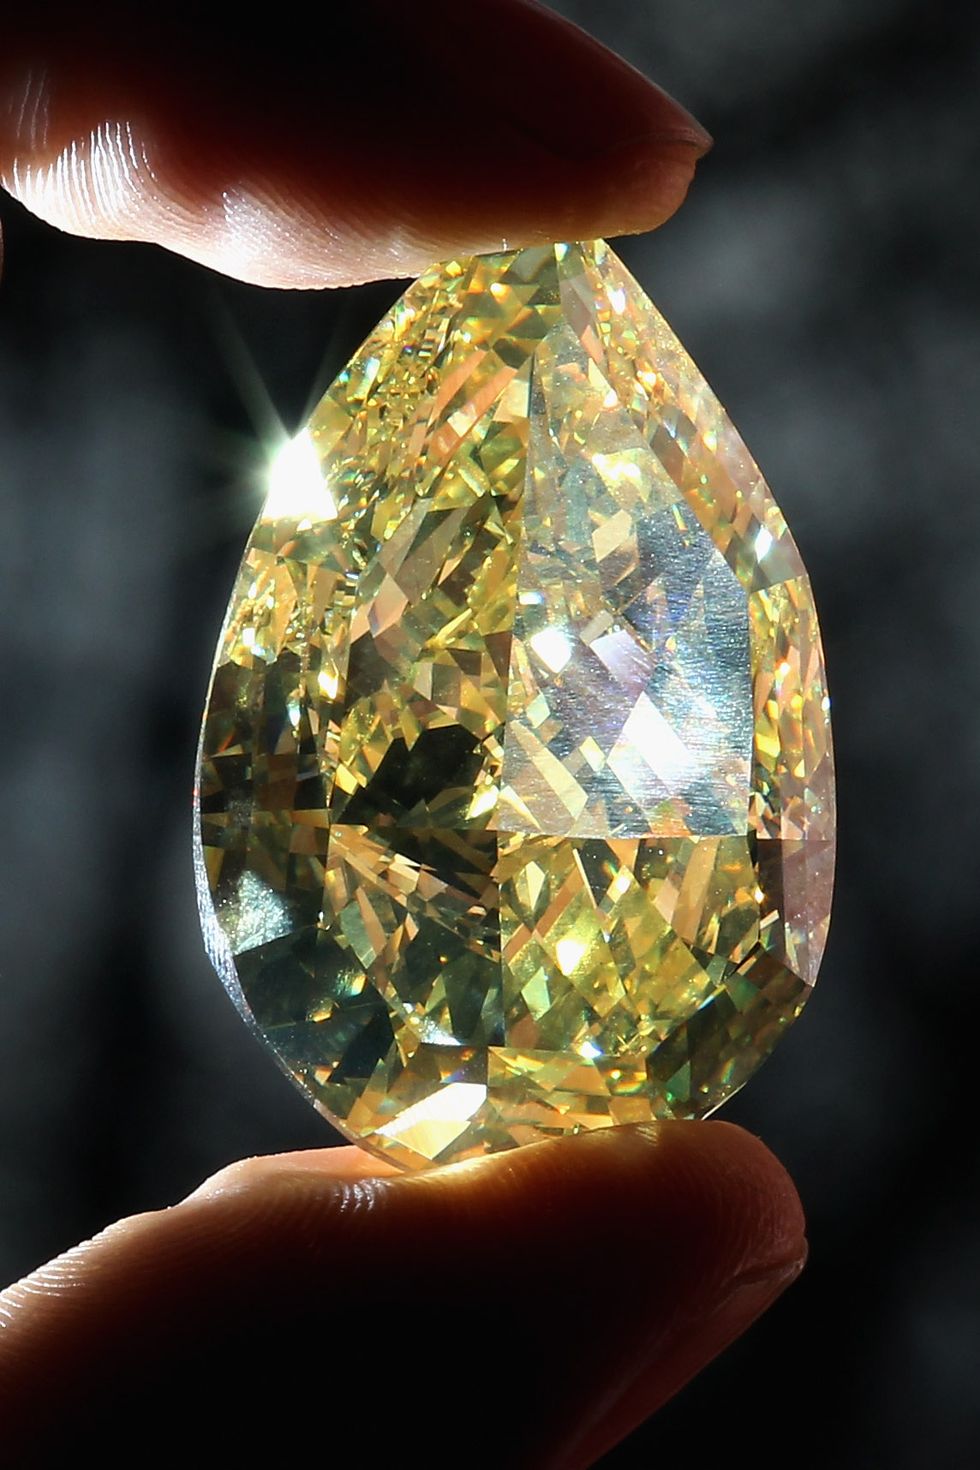 london, england   february 24  a rare yellow pear shaped diamond is held during a photocall at the natural history museum on february 24, 2011 in london, england the 11003 carat diamond, which is on loan from leading specialised diamond manufacturers cora international, is the largest yellow pear shaped diamond in the world and goes on display in the vault at the natural history museum in london from february 25, 2011  photo by dan kitwoodgetty images